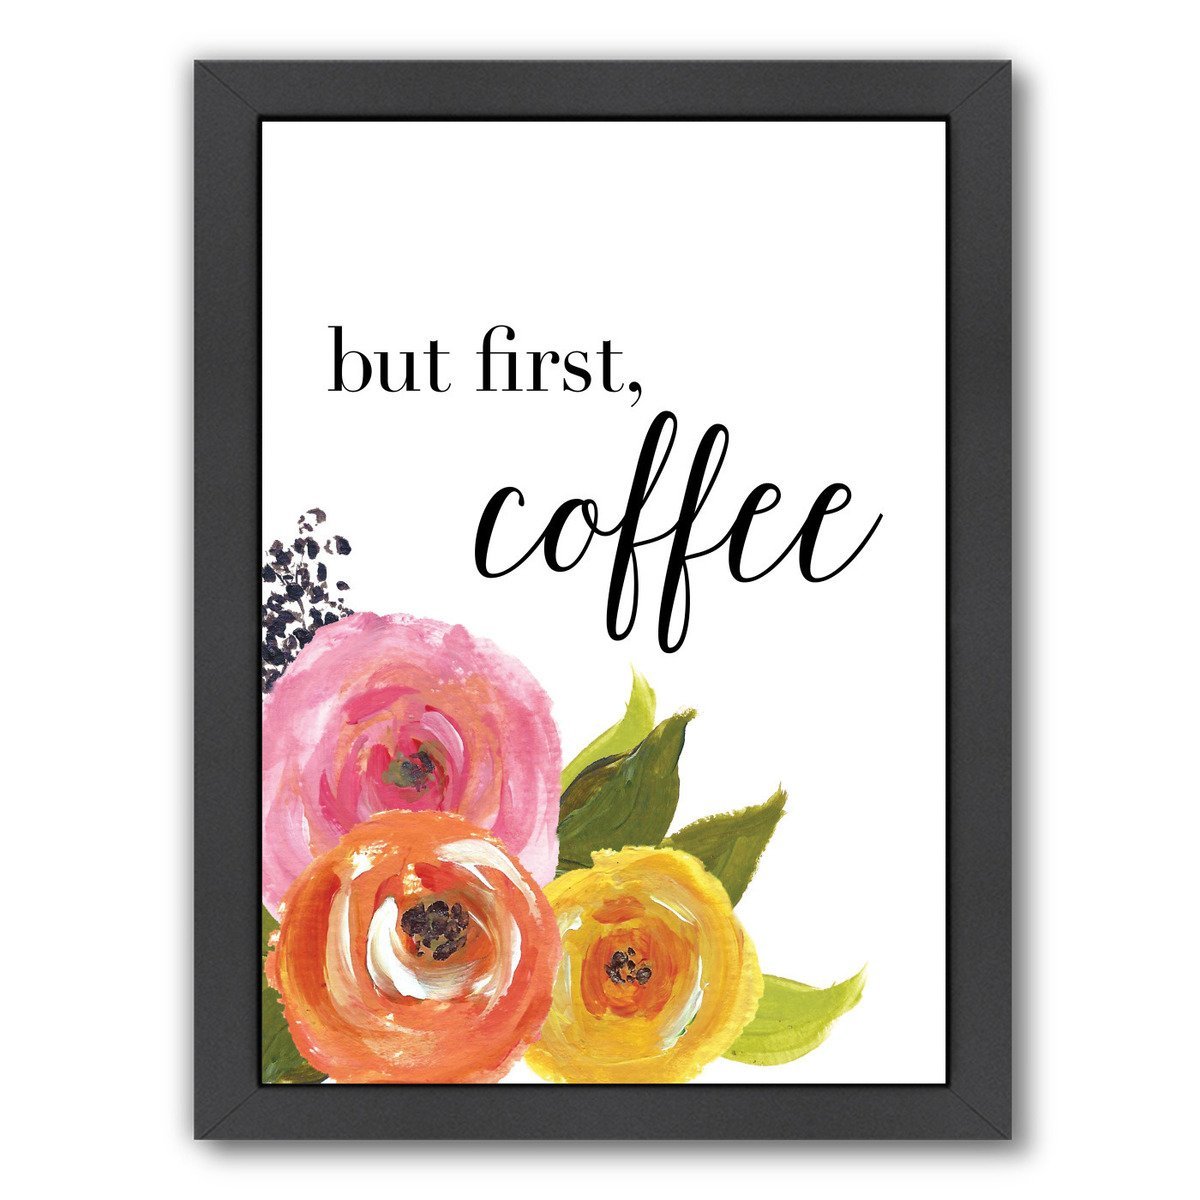 But First Coffee by Amy Brinkman Framed Print - Americanflat